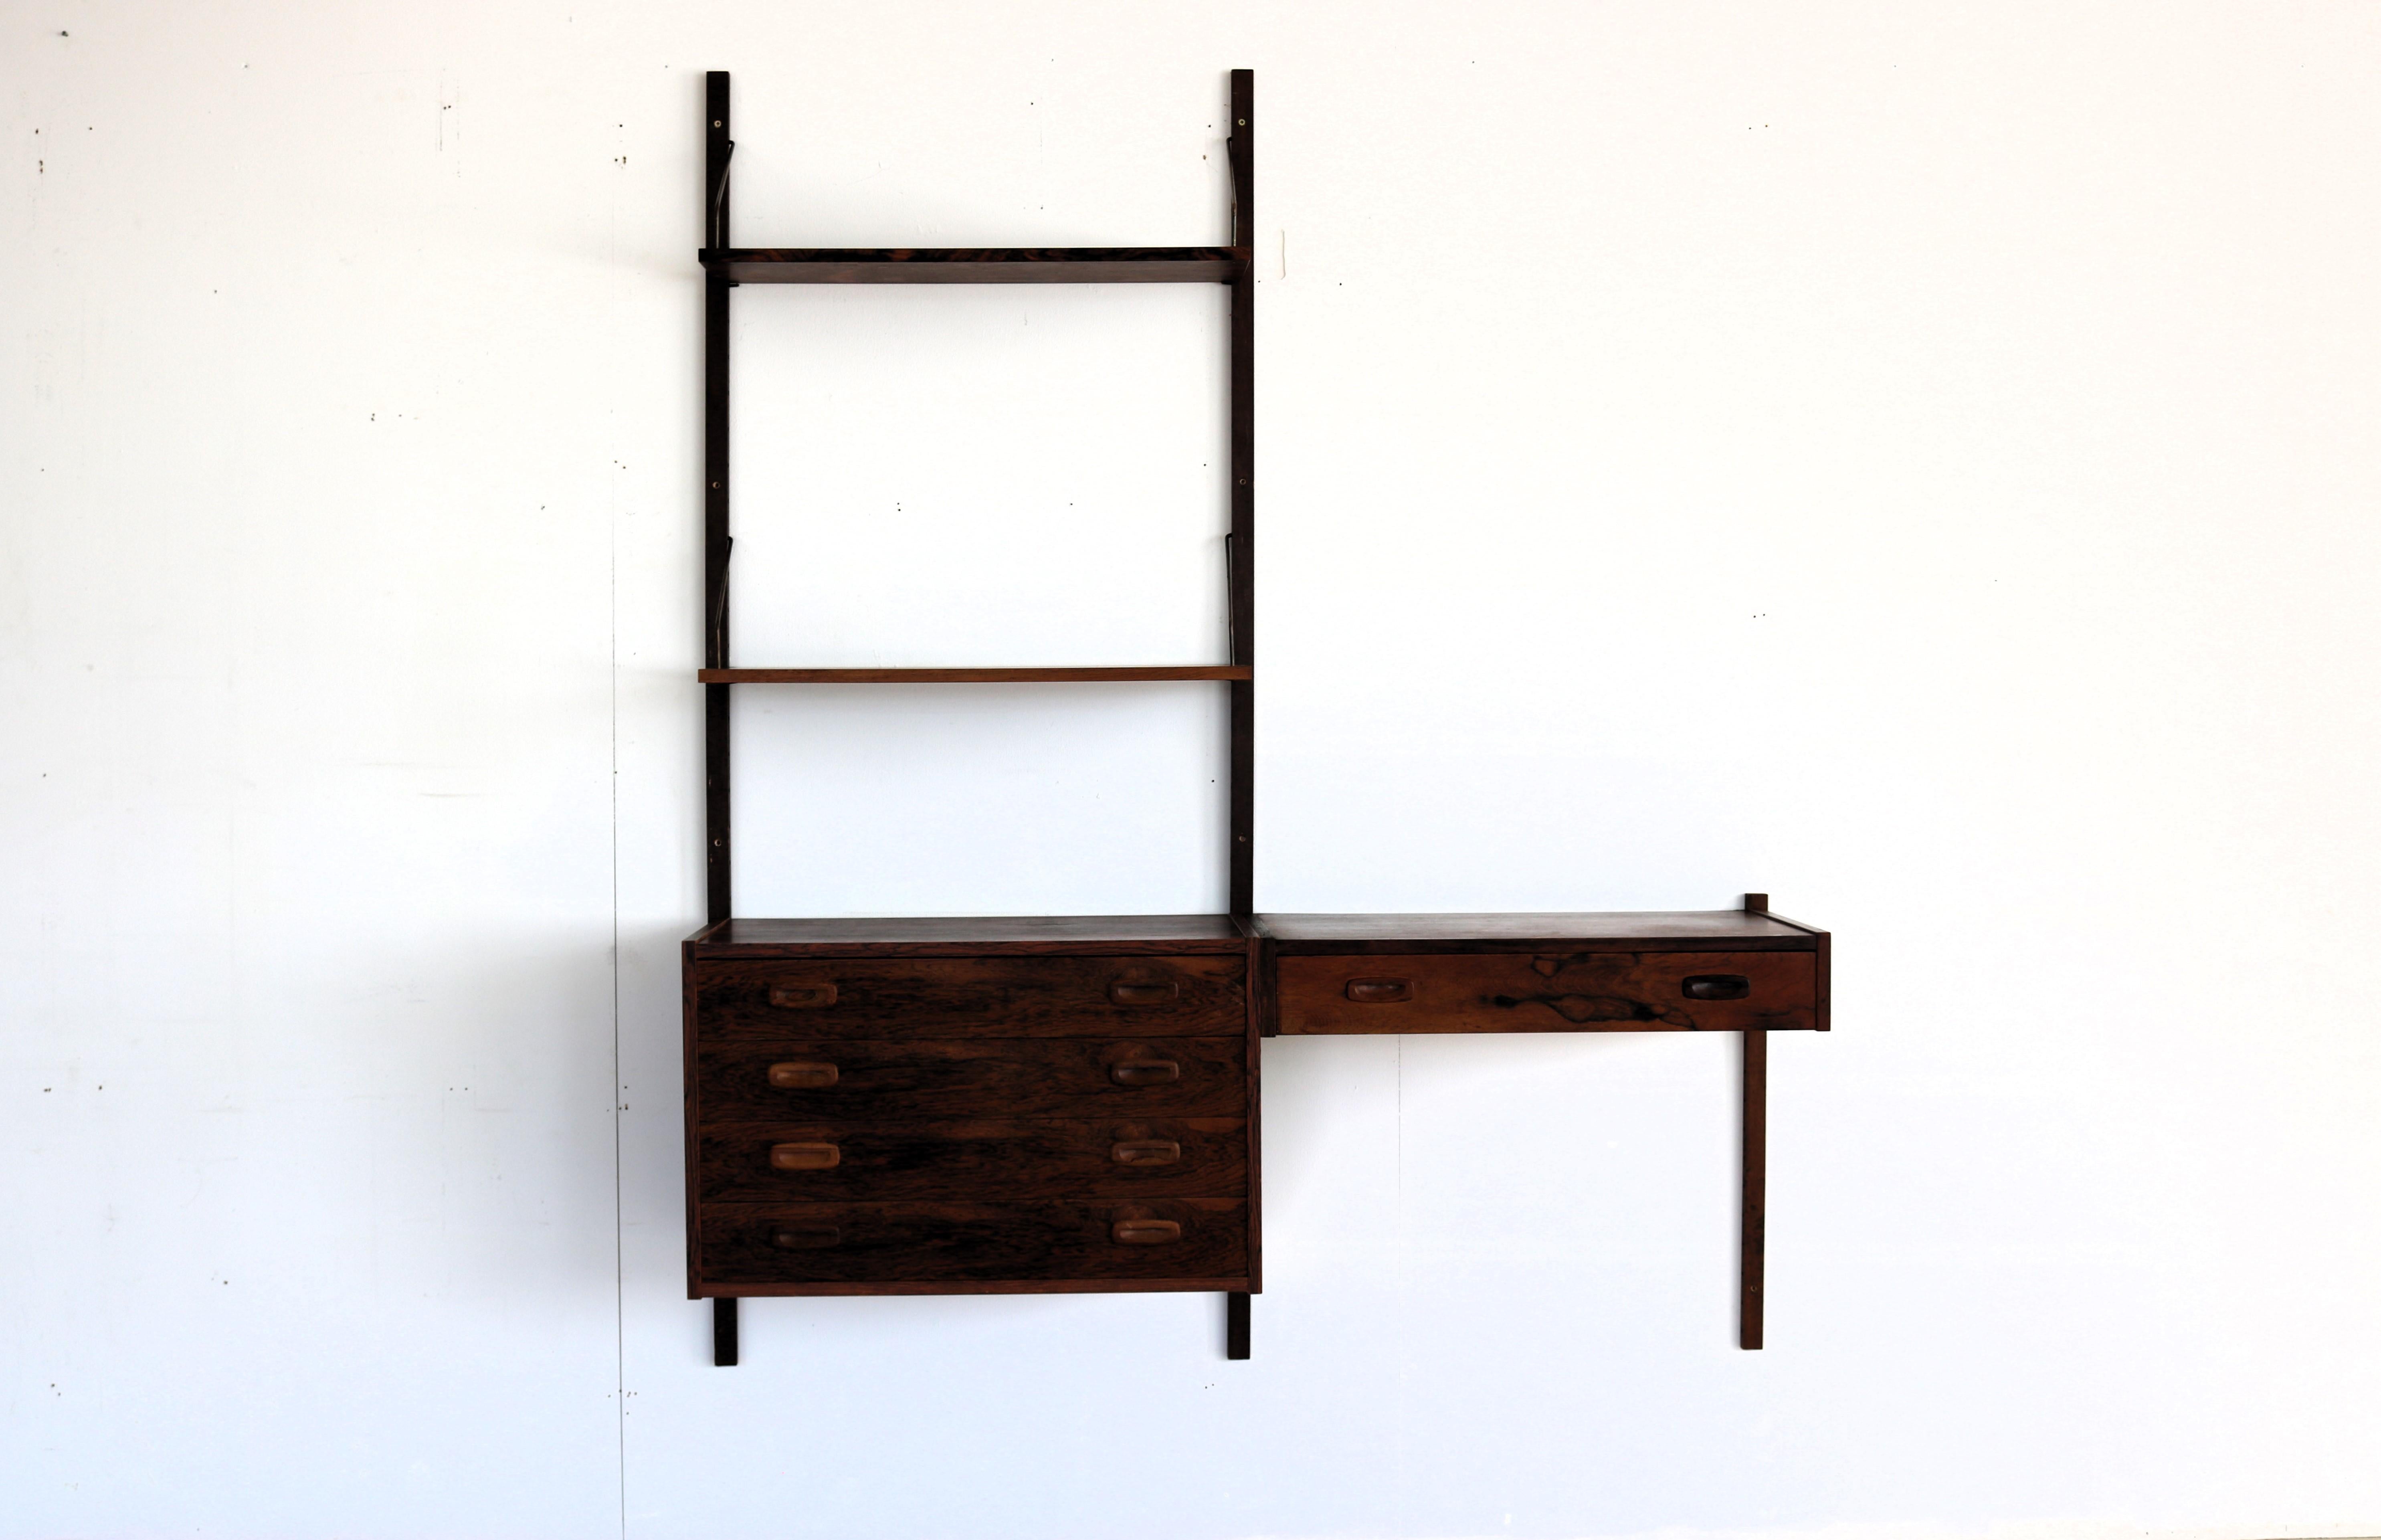 Vintage wall system wall unit 1960s Danish (1)

Period 1960s
Designs unknown Denmark
Conditions good light signs of use
Size 200 x 163 x 45 (hxwxd)

Details rosewood; brass; modular; can also be combined with a second wall system;

Article